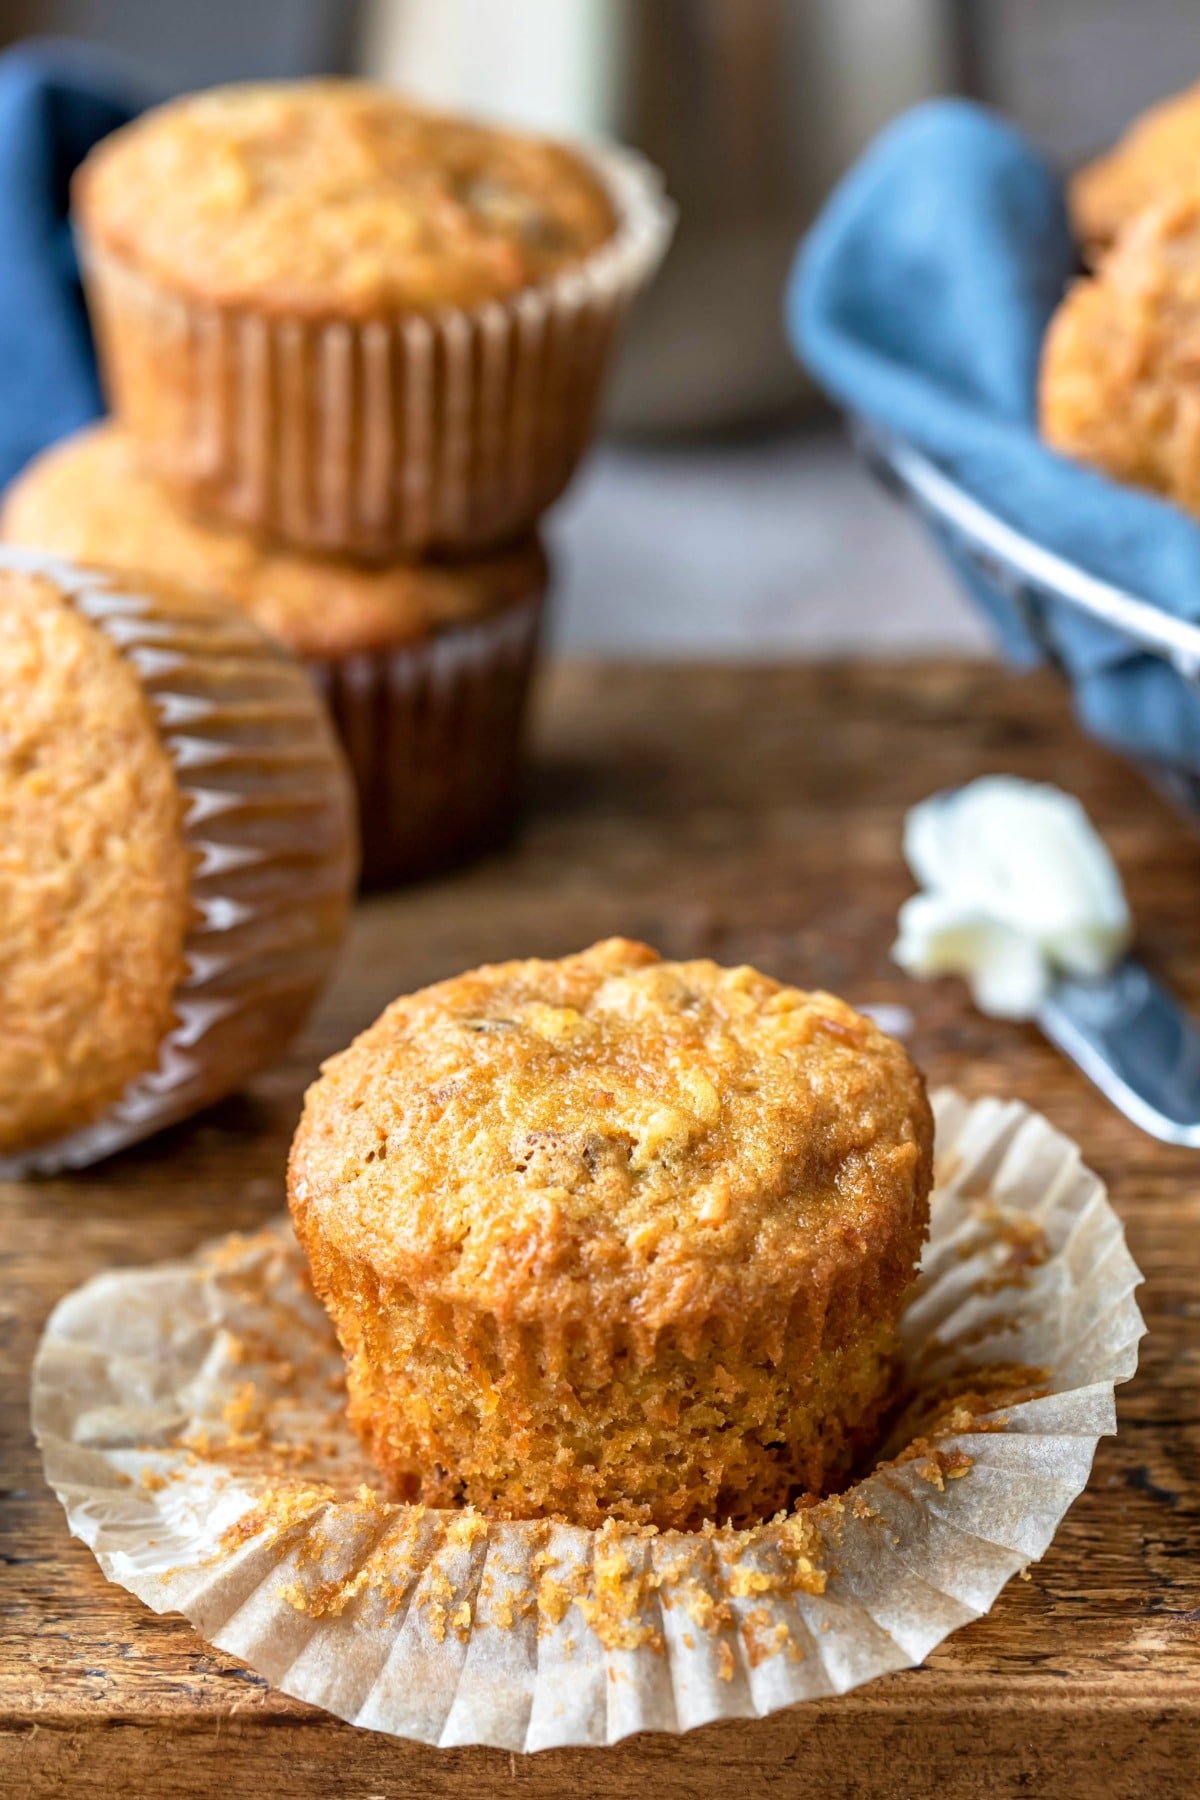 Unwrapped carrot cake muffin next to a butter knife with butter